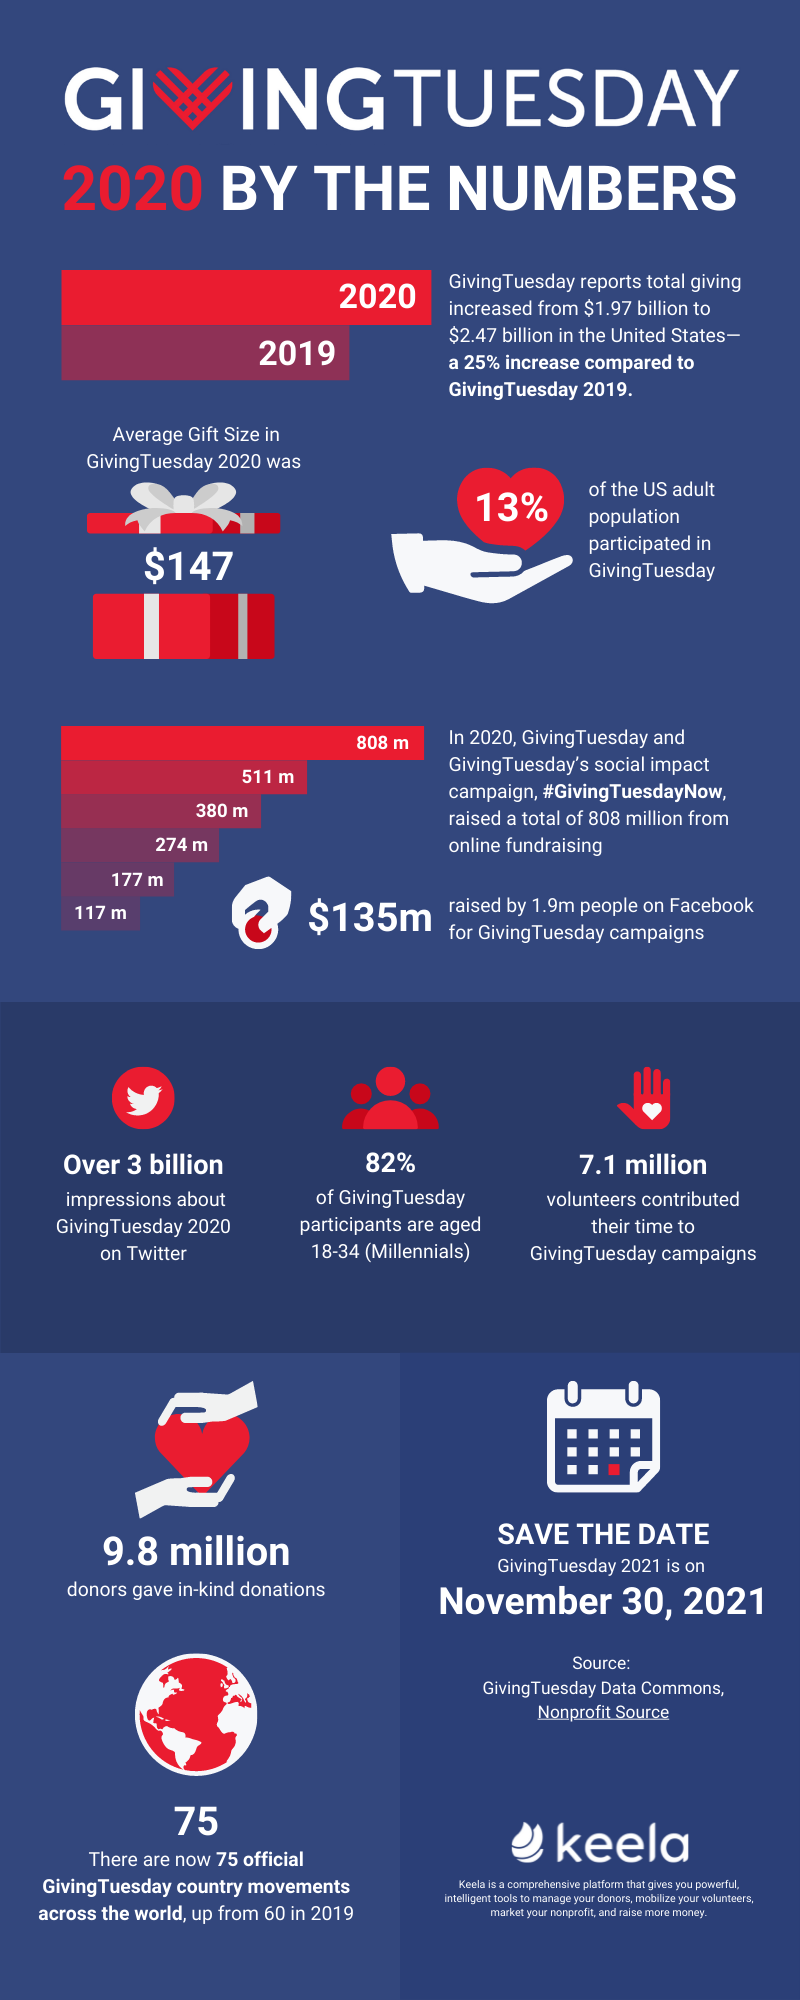 [INFOGRAPHIC] GivingTuesday 2020 Results and Statistics